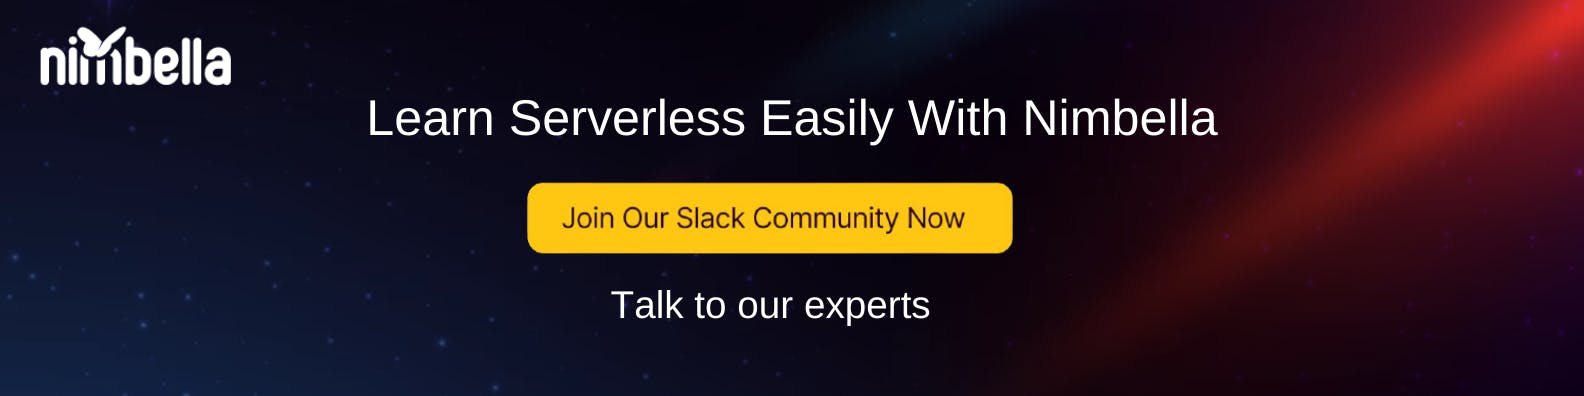 Learn Serverless Easily With Nimbella.png